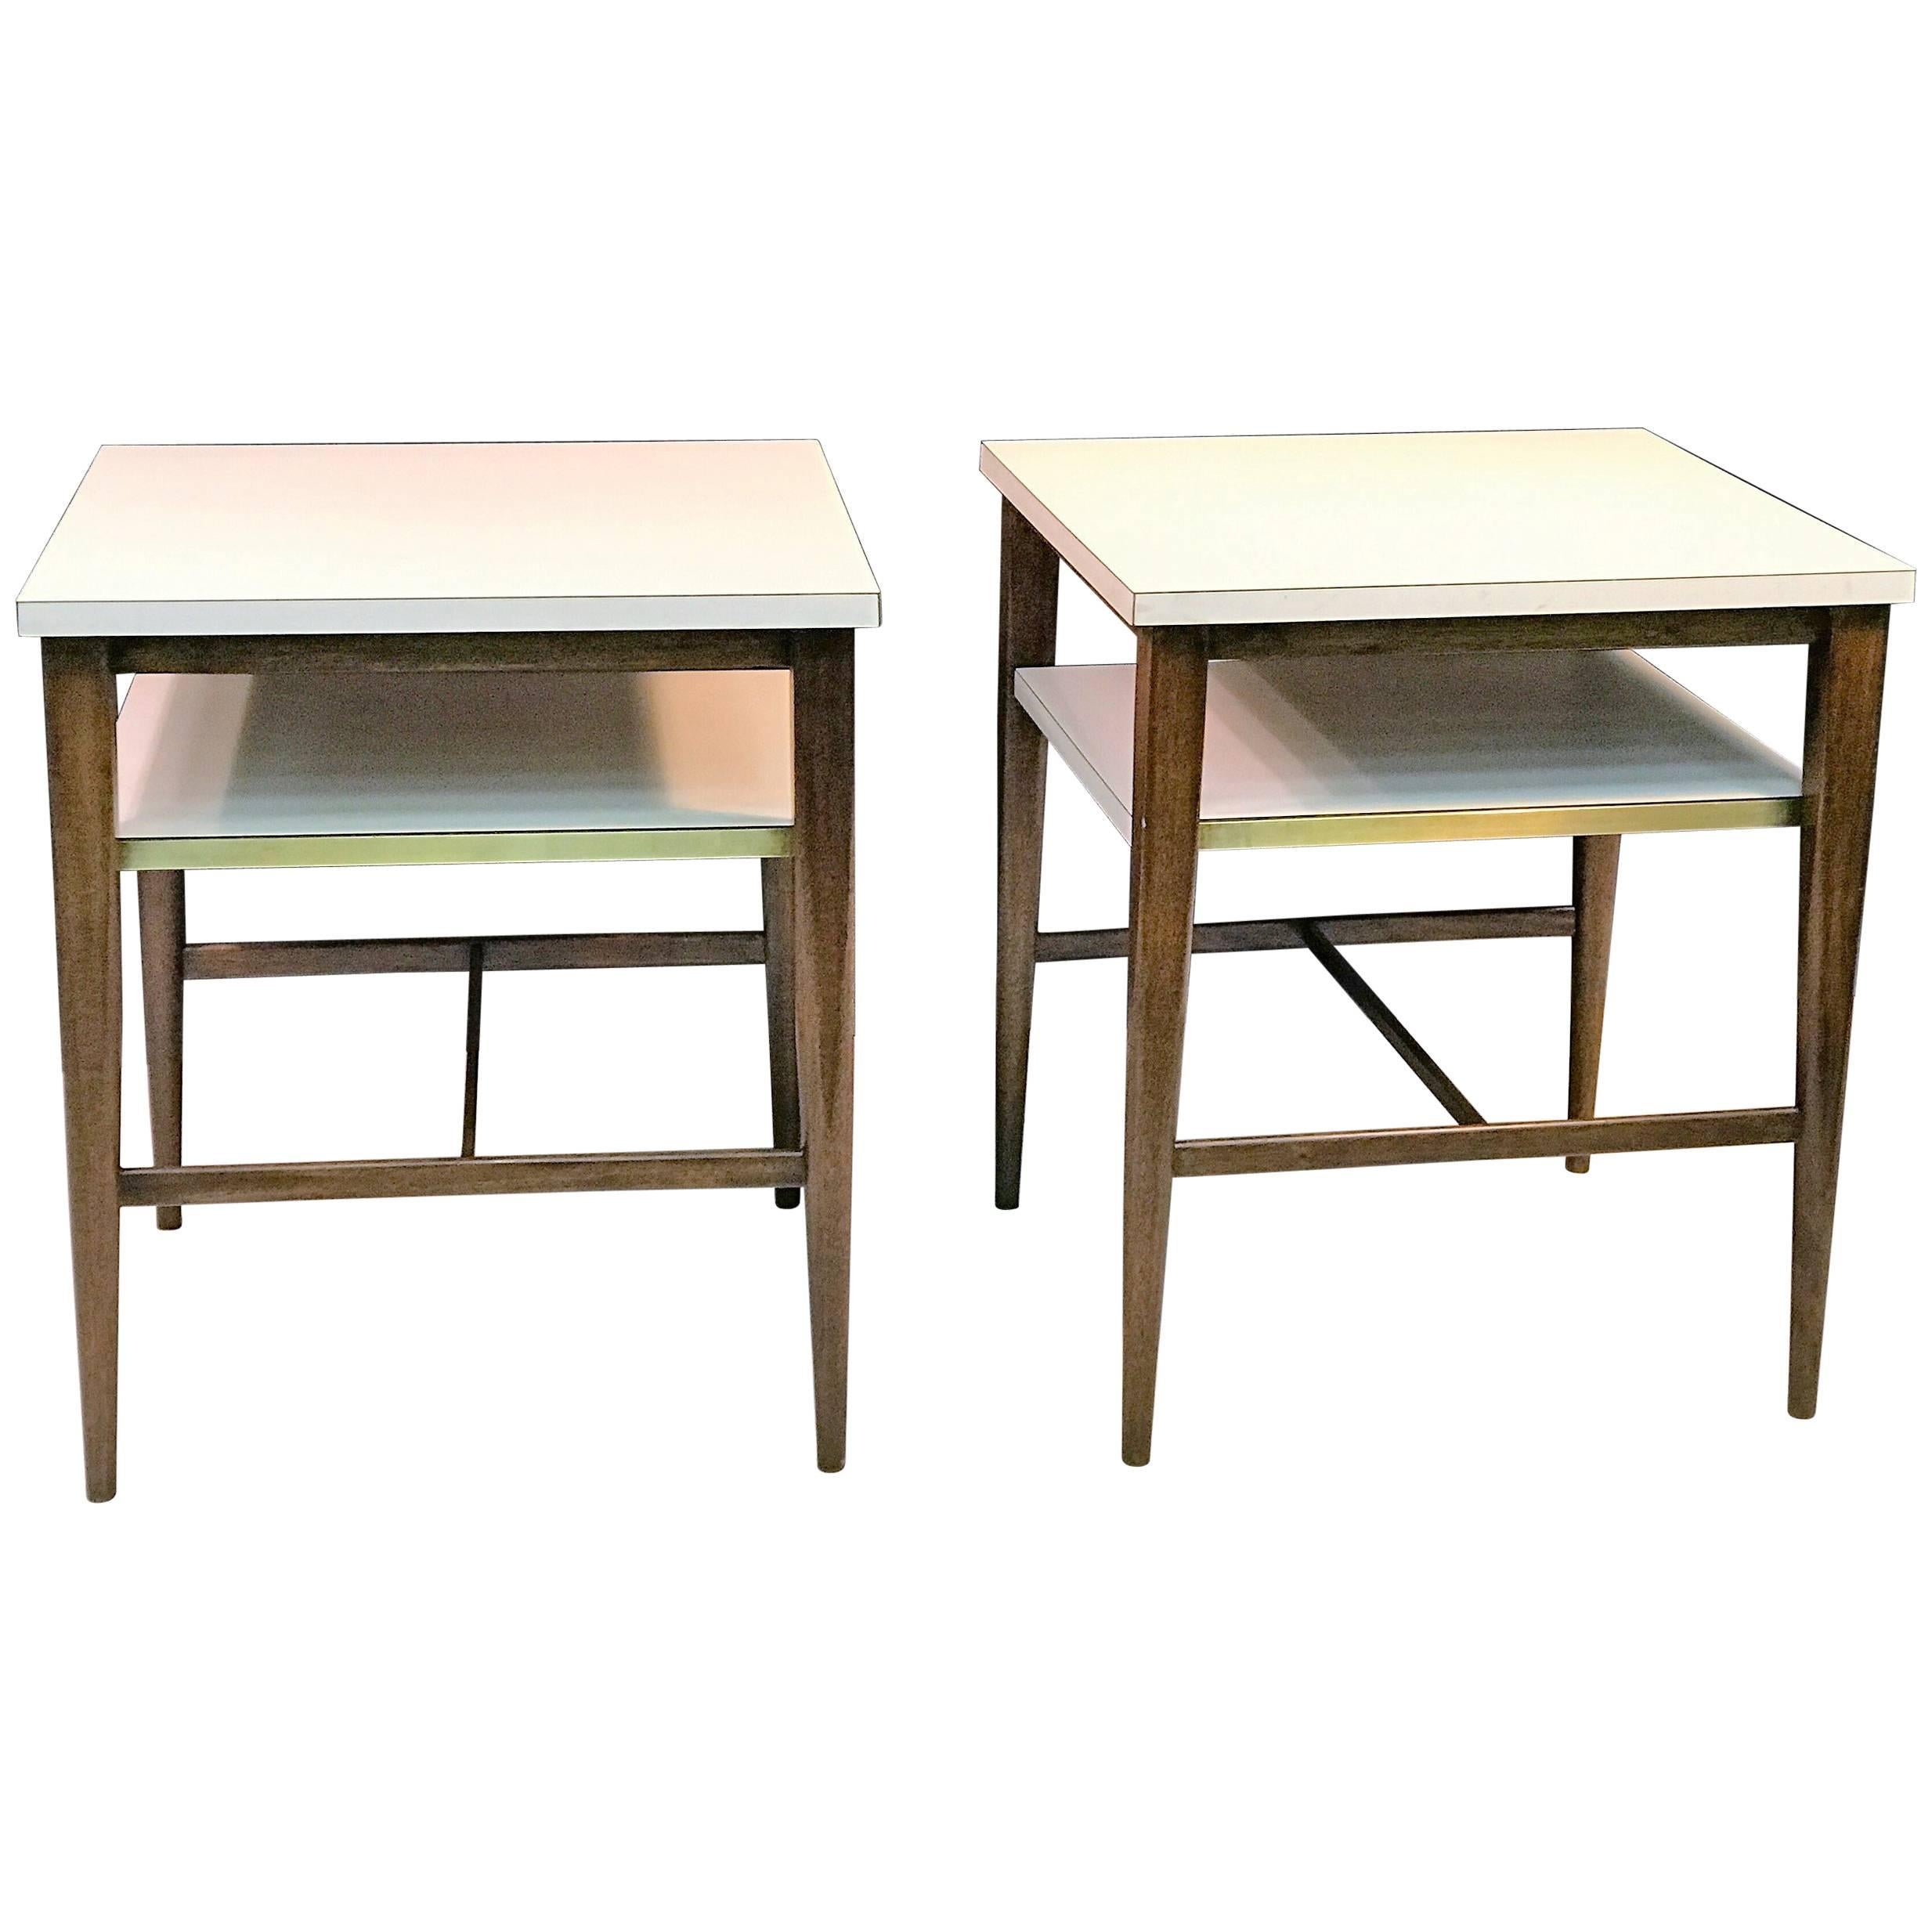 Great Pair of Modernist Paul McCobb Laminate and Wood Tables For Sale